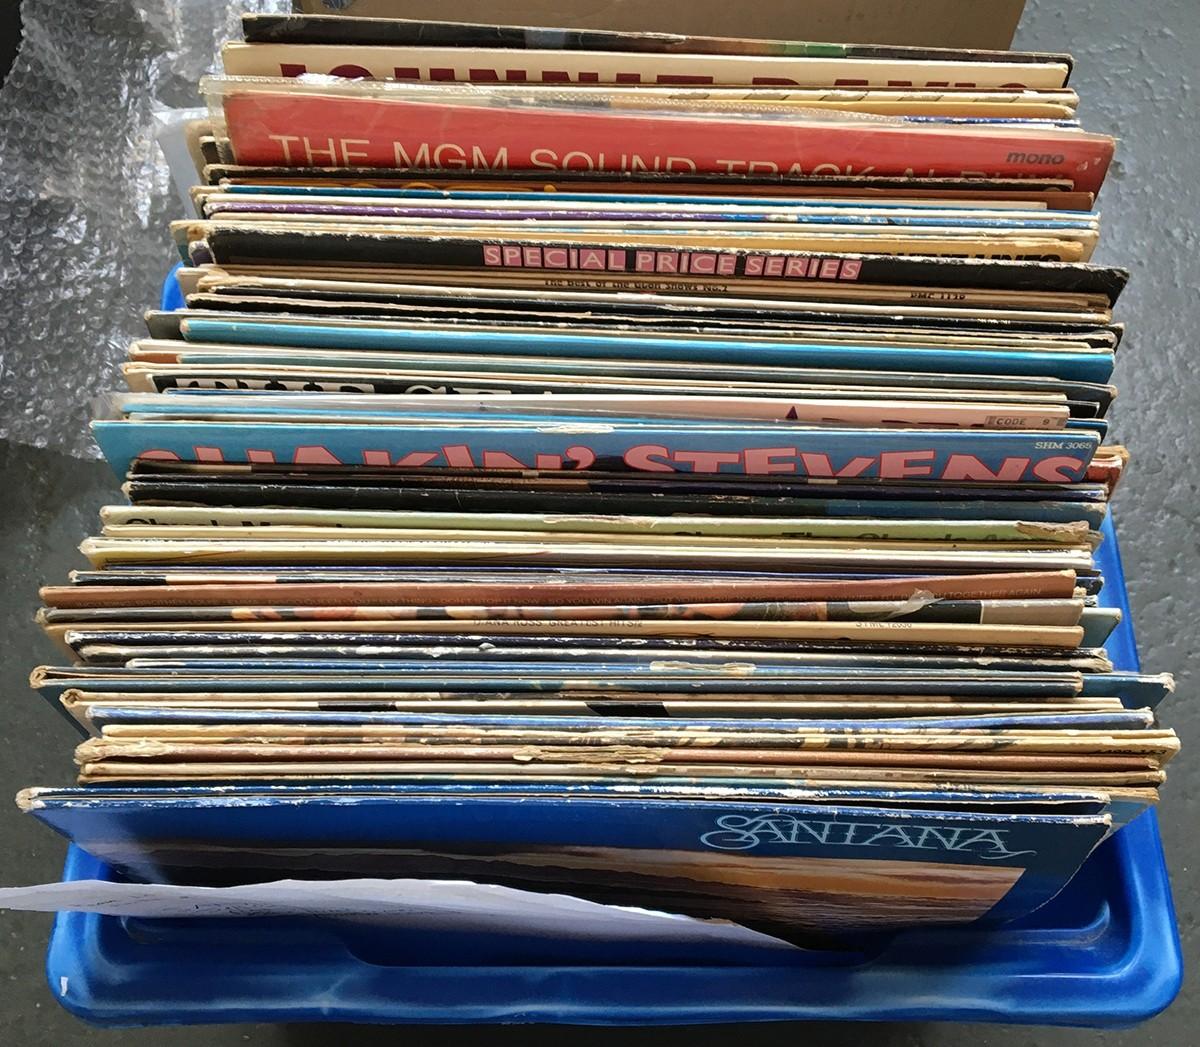 A mixed lot of rock and pop LPs to include Santana, Jeff Beck, Rod Stewart, Status Quo, etc